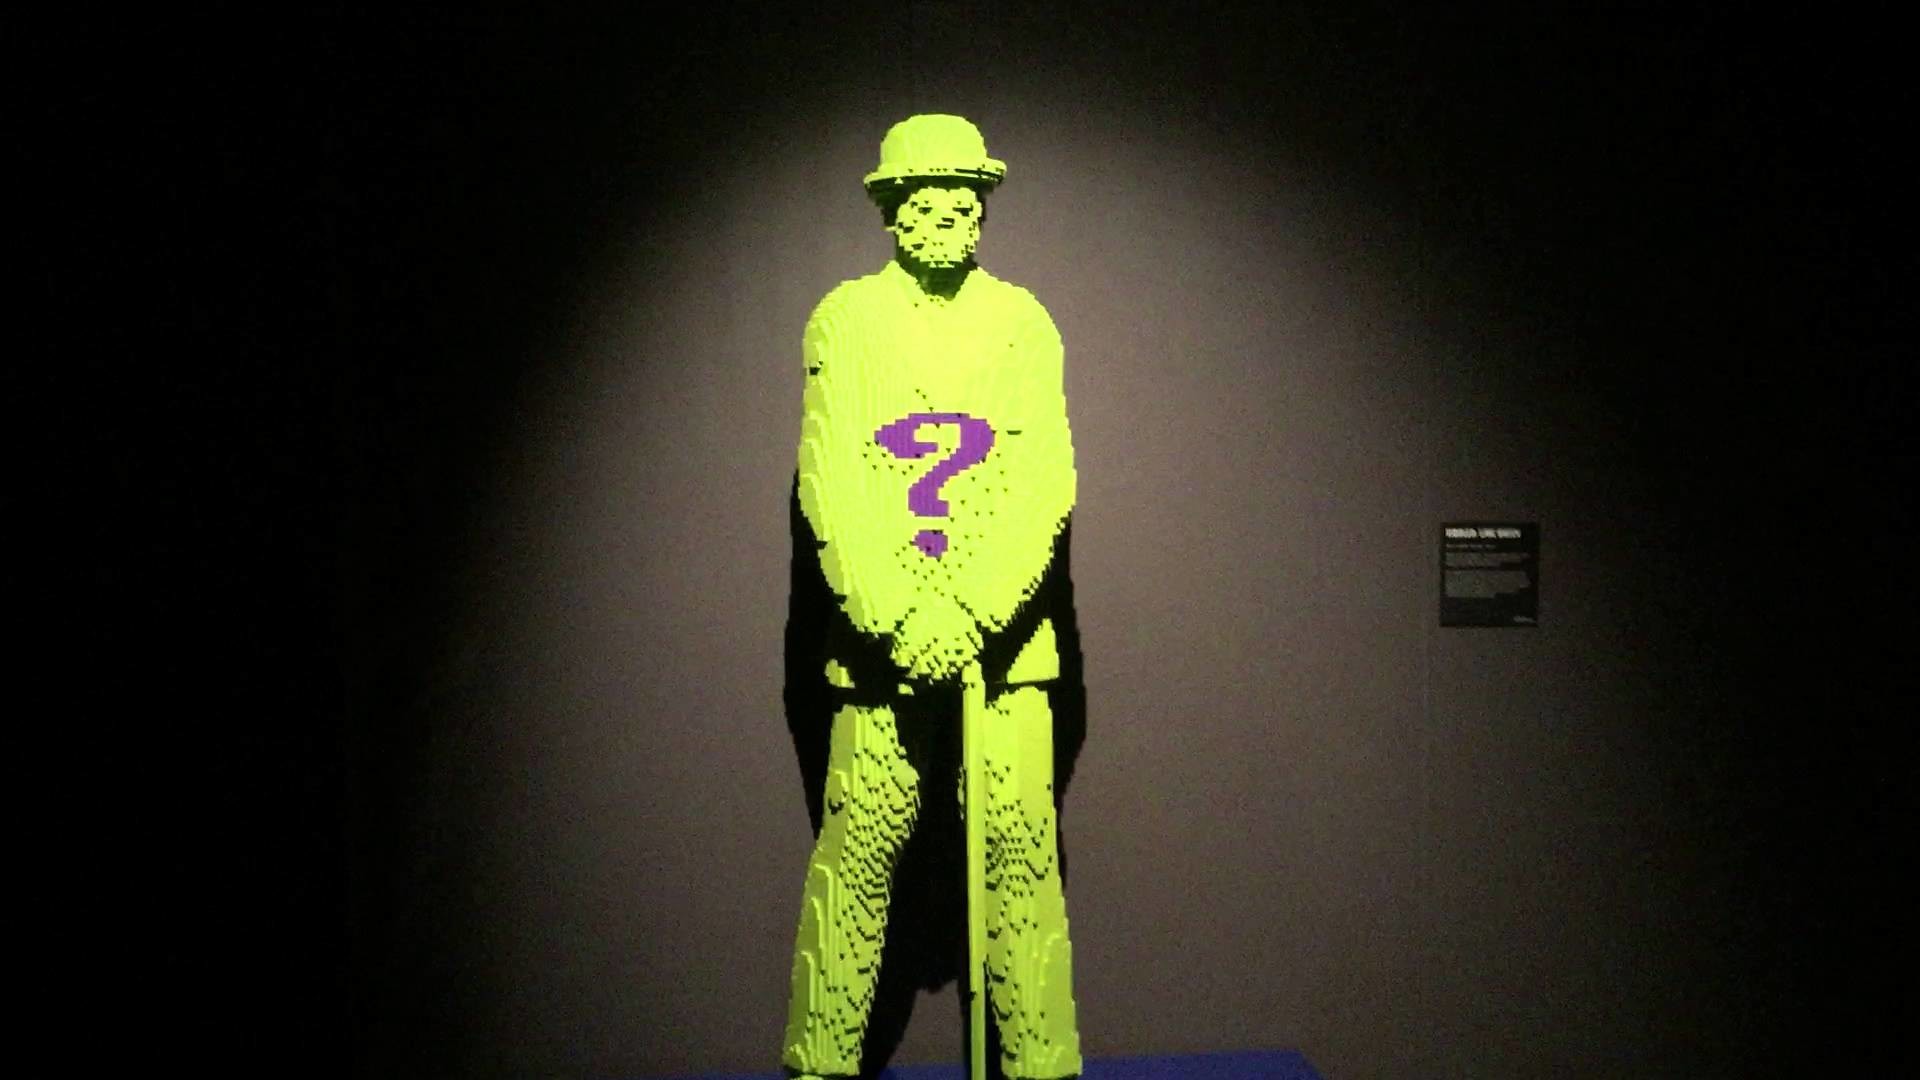 1920x1080 Lego The Riddler at The Art of the Brick: DC Comics - Powerhouse Museum,  Sydney